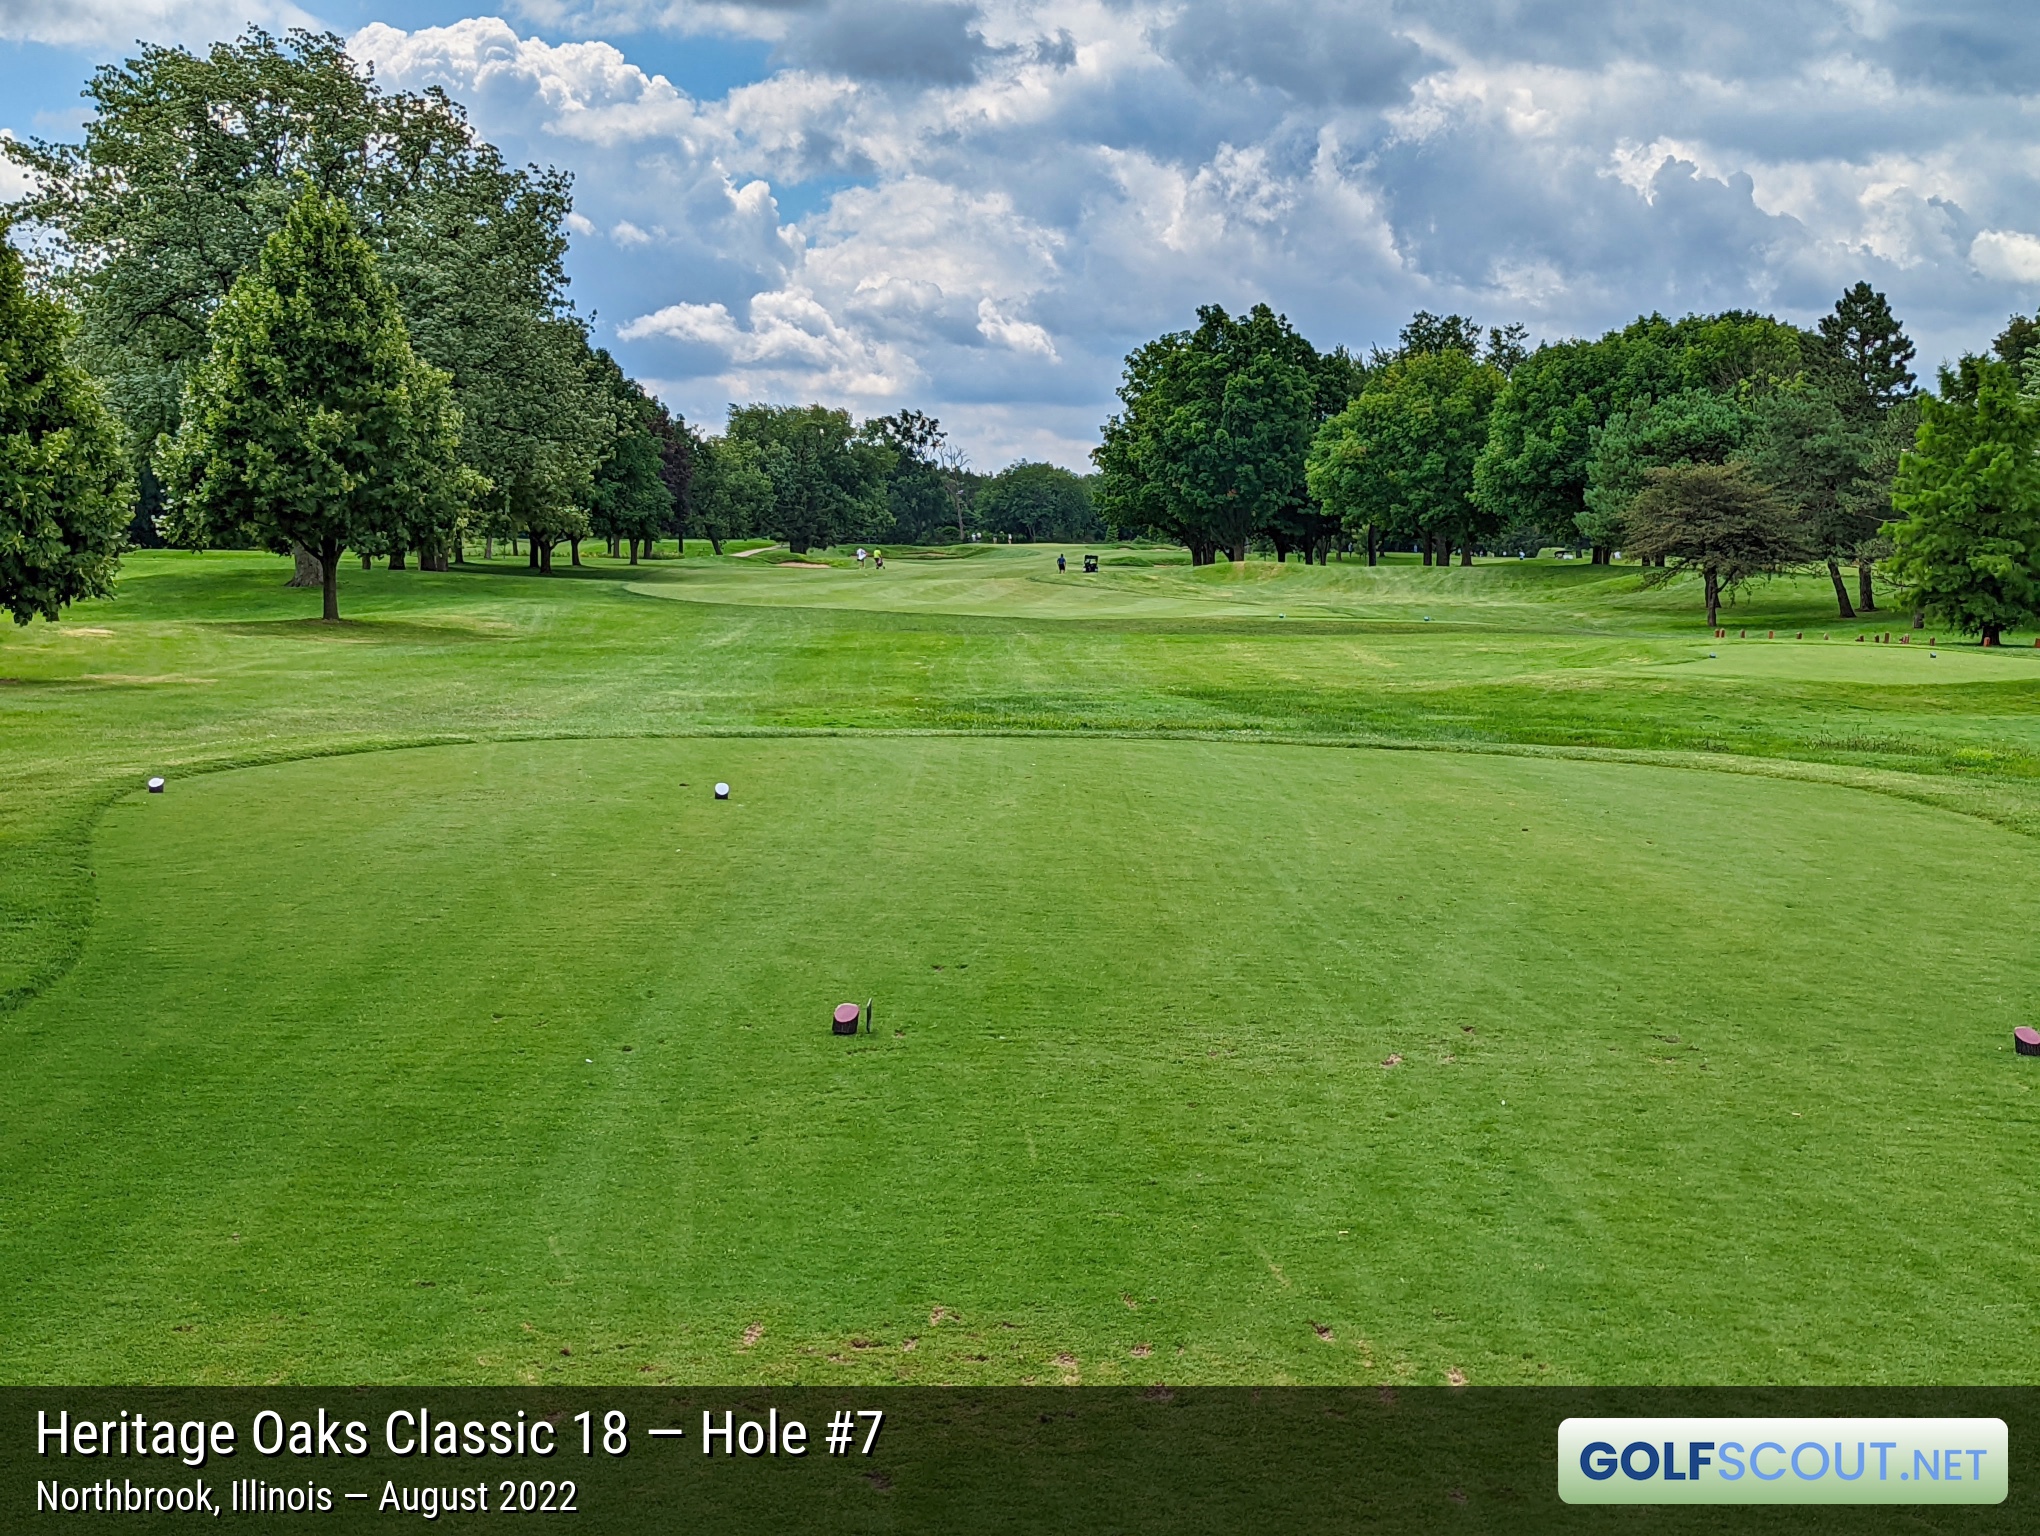 Photo of hole #7 at Heritage Oaks Golf Club - Classic 18 in Northbrook, Illinois. 